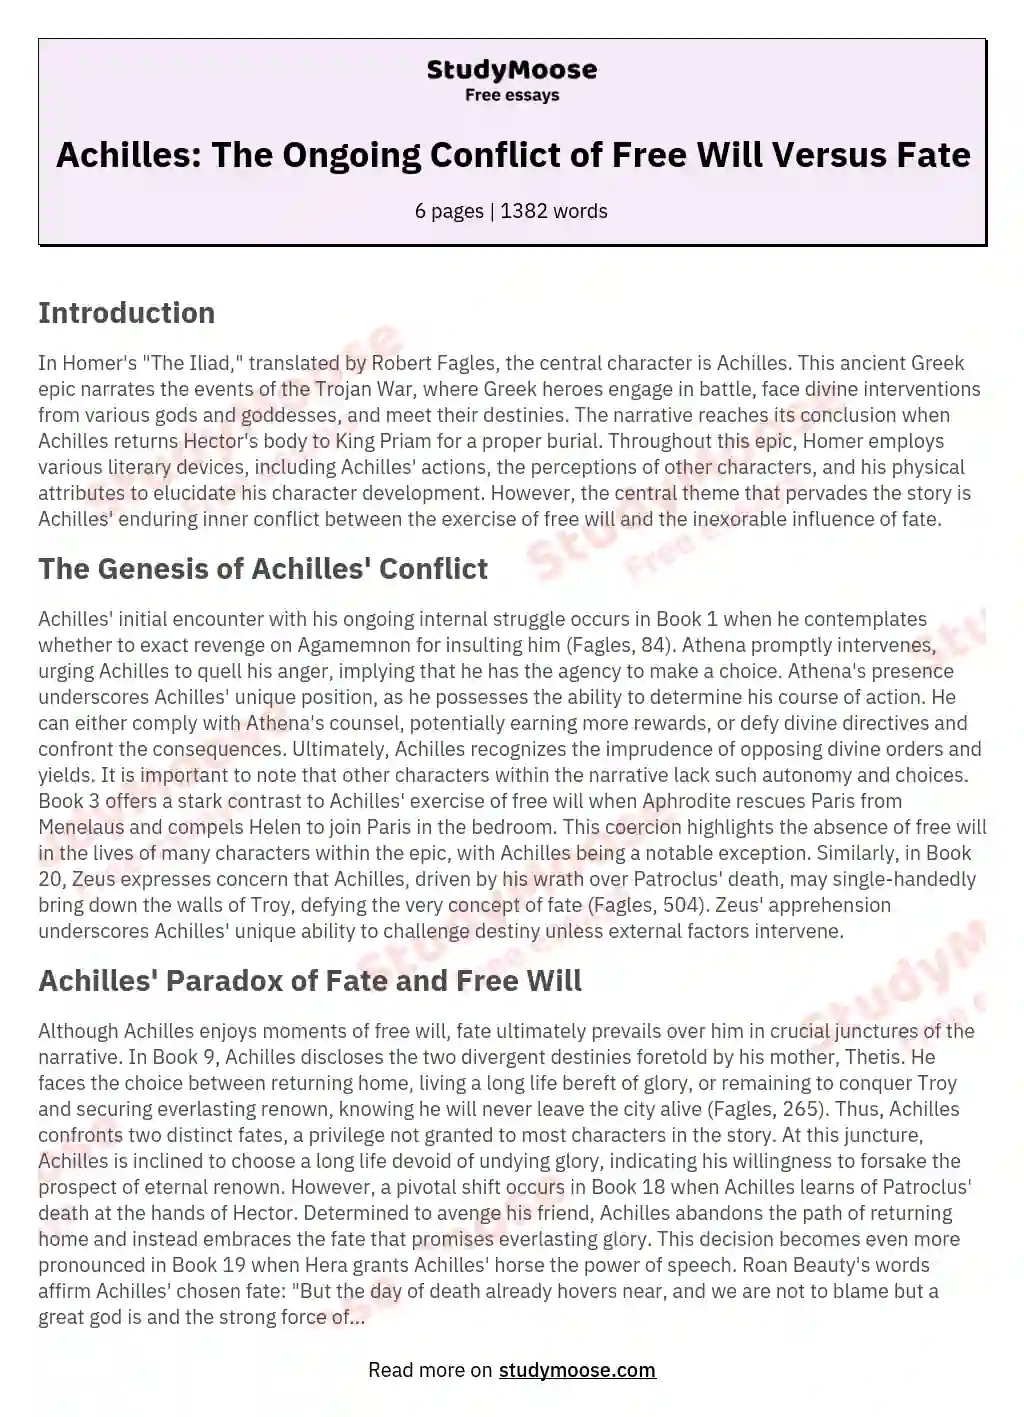 Achilles: The Ongoing Conflict of Free Will Versus Fate essay